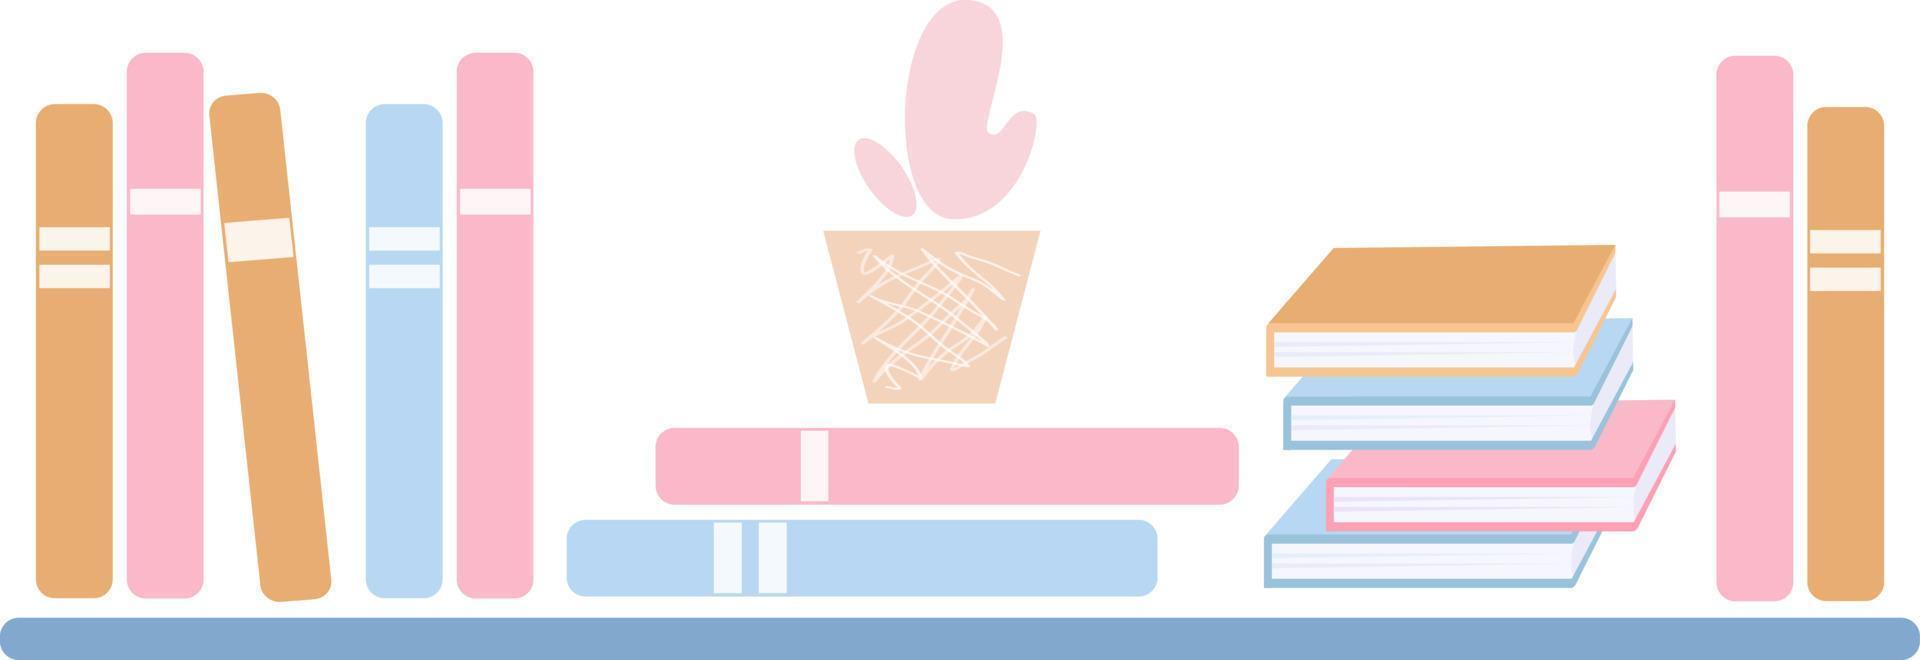 banner bookshelf with cactus flower, vector illustration concept for bookstores and libraries